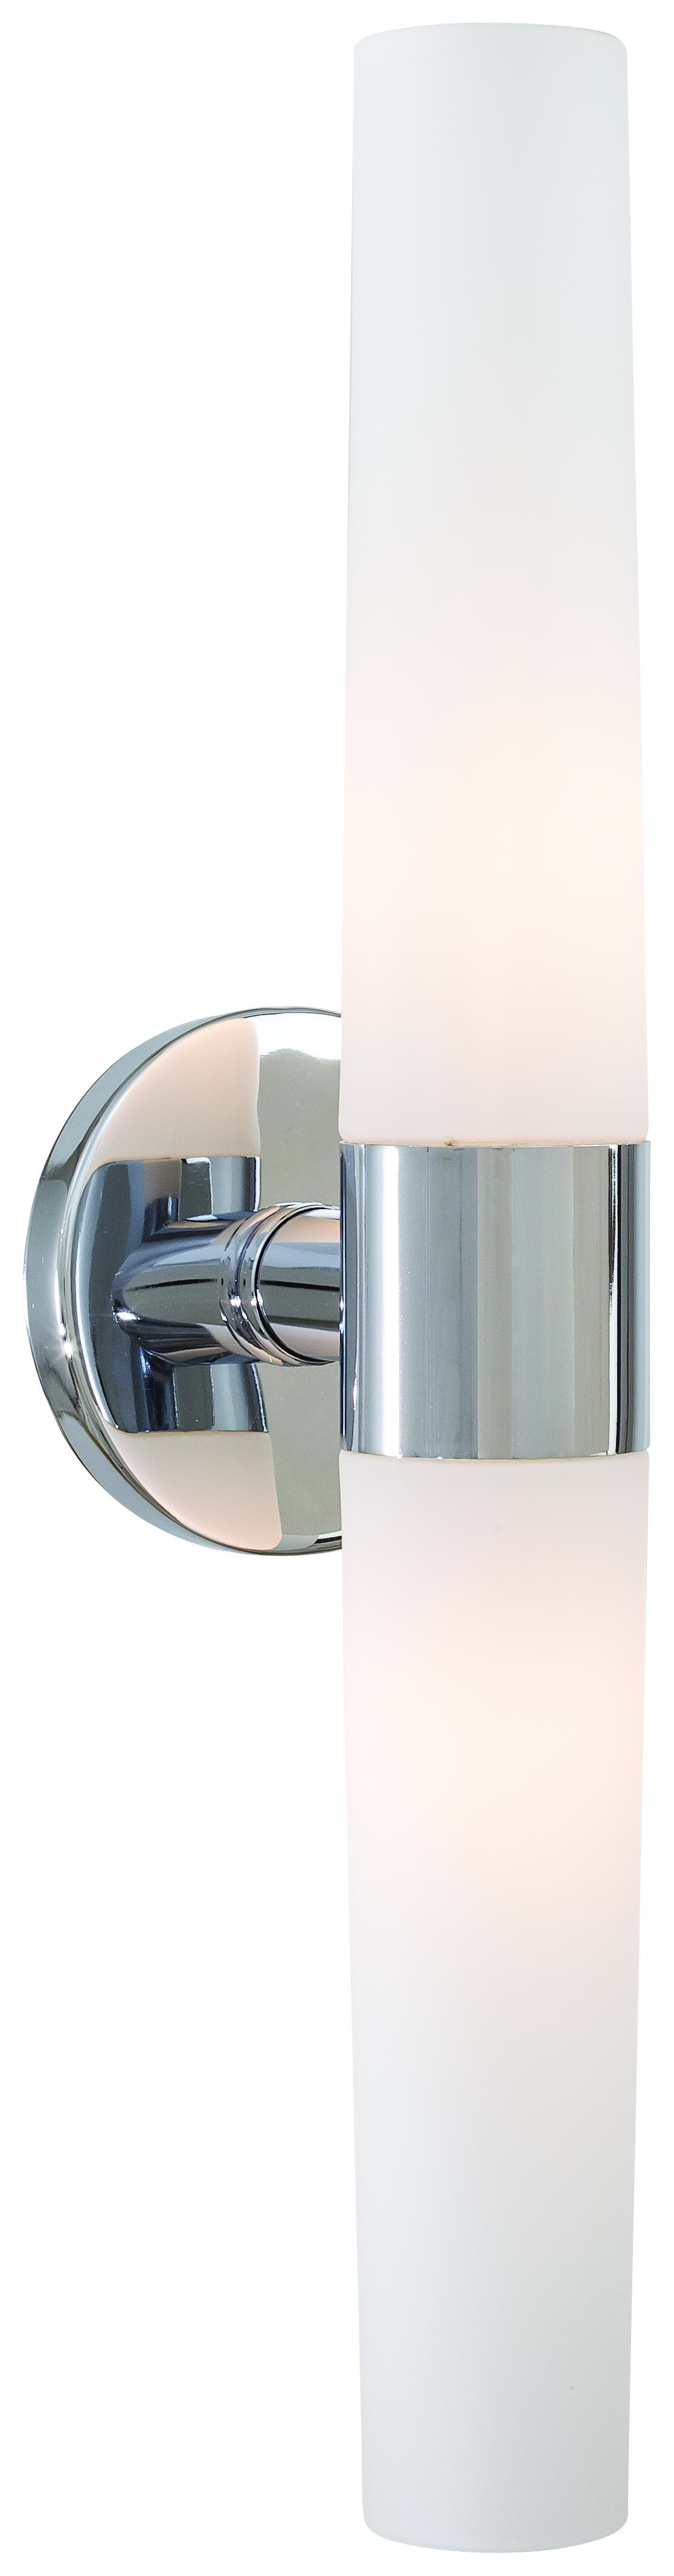 George Kovacs Saber Light Bathroom Fixture in Chrome, P5042-077 The  Light Brothers